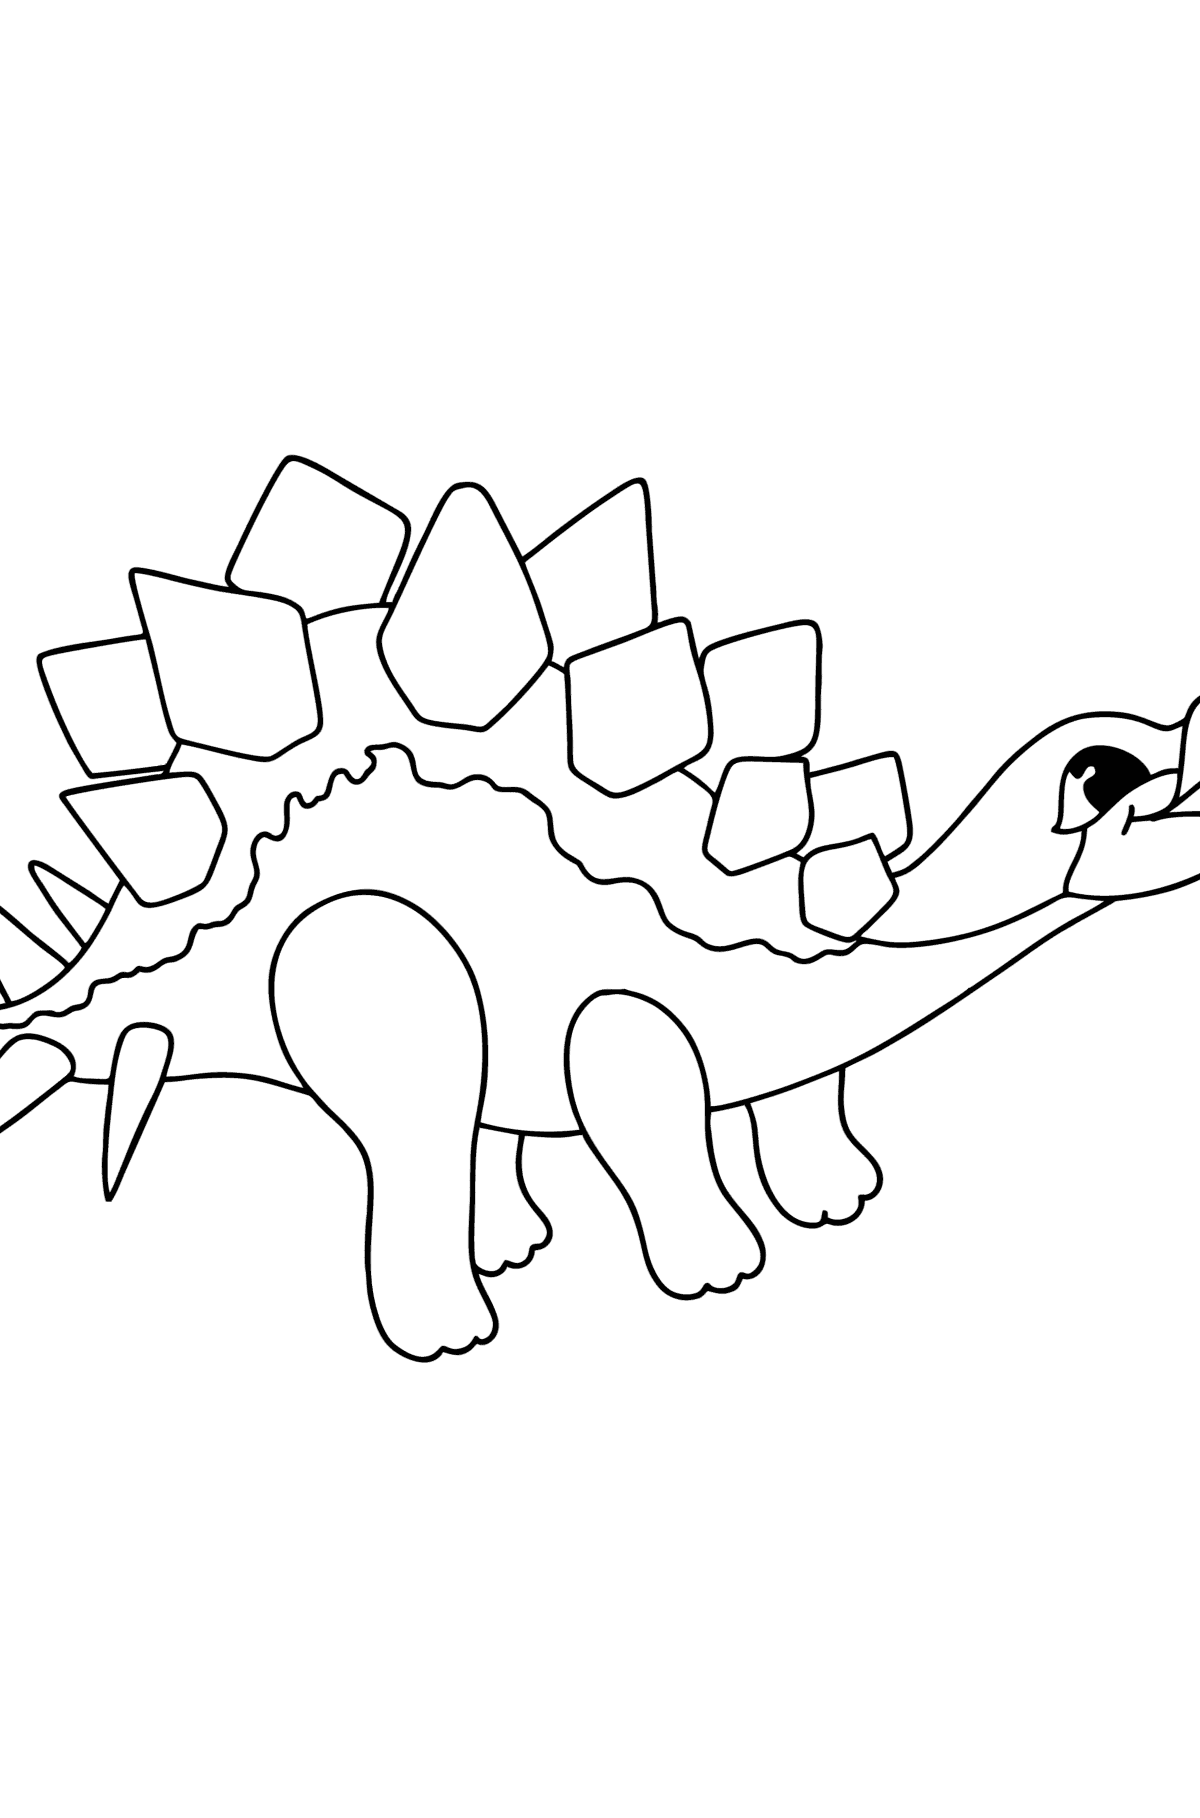 Stegosaurus coloring page - Coloring Pages for Kids